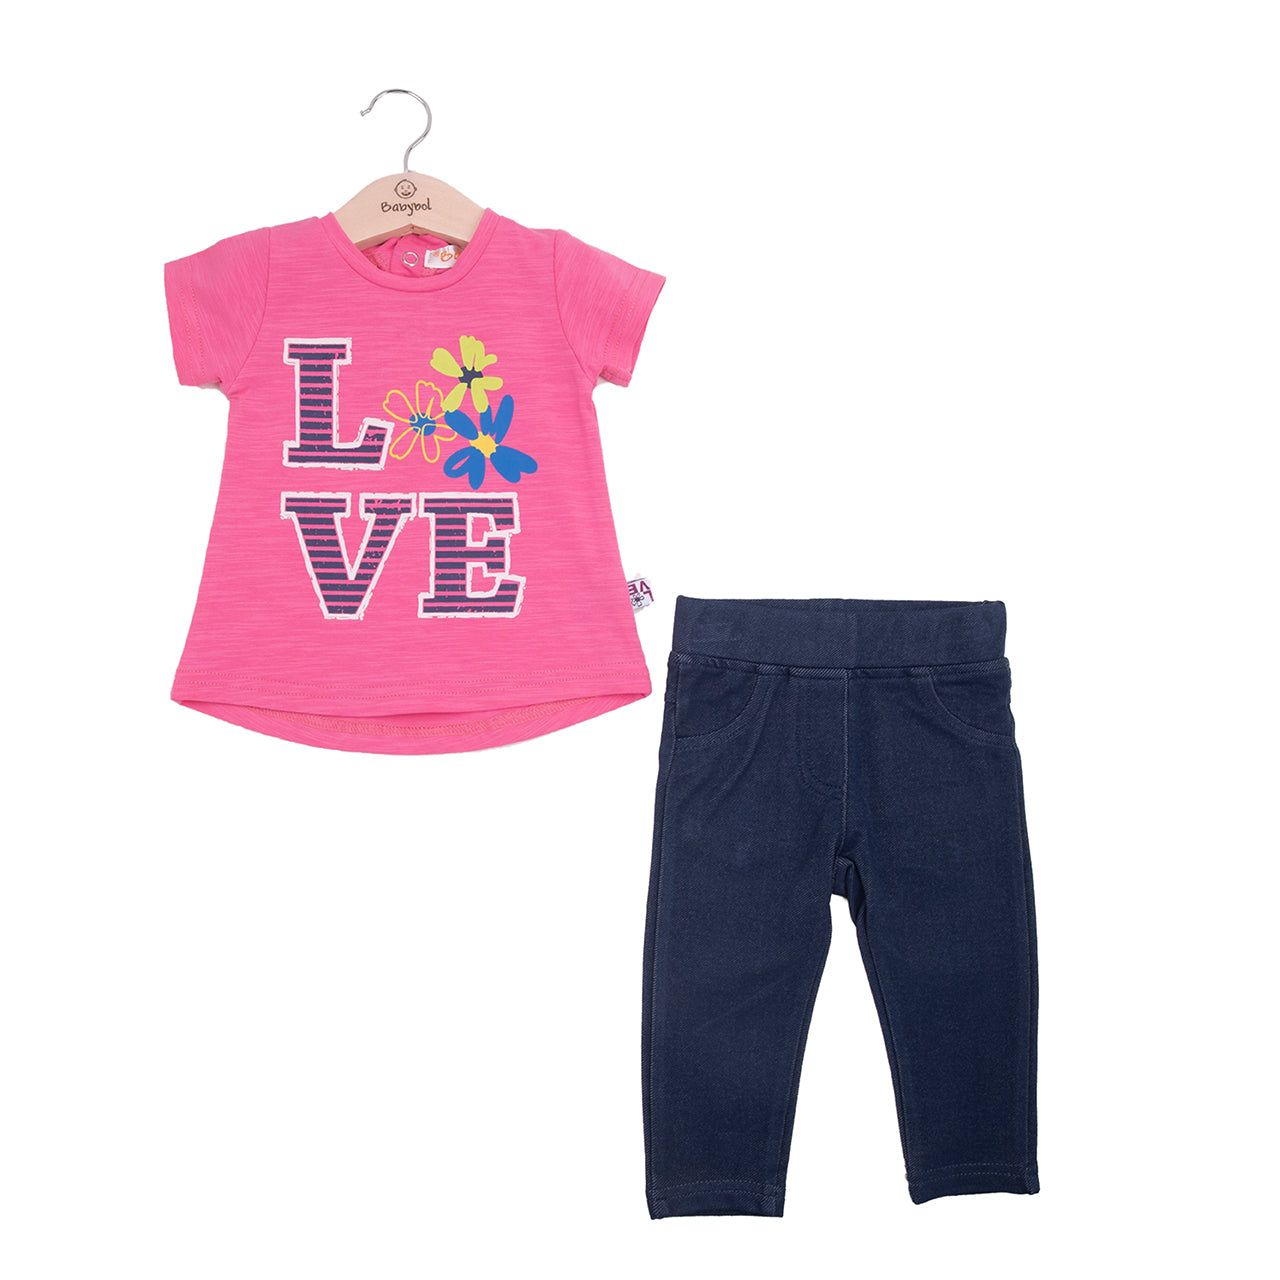 Baby Girl 2-Piece "LOVE" T-Shirt and Legging Set